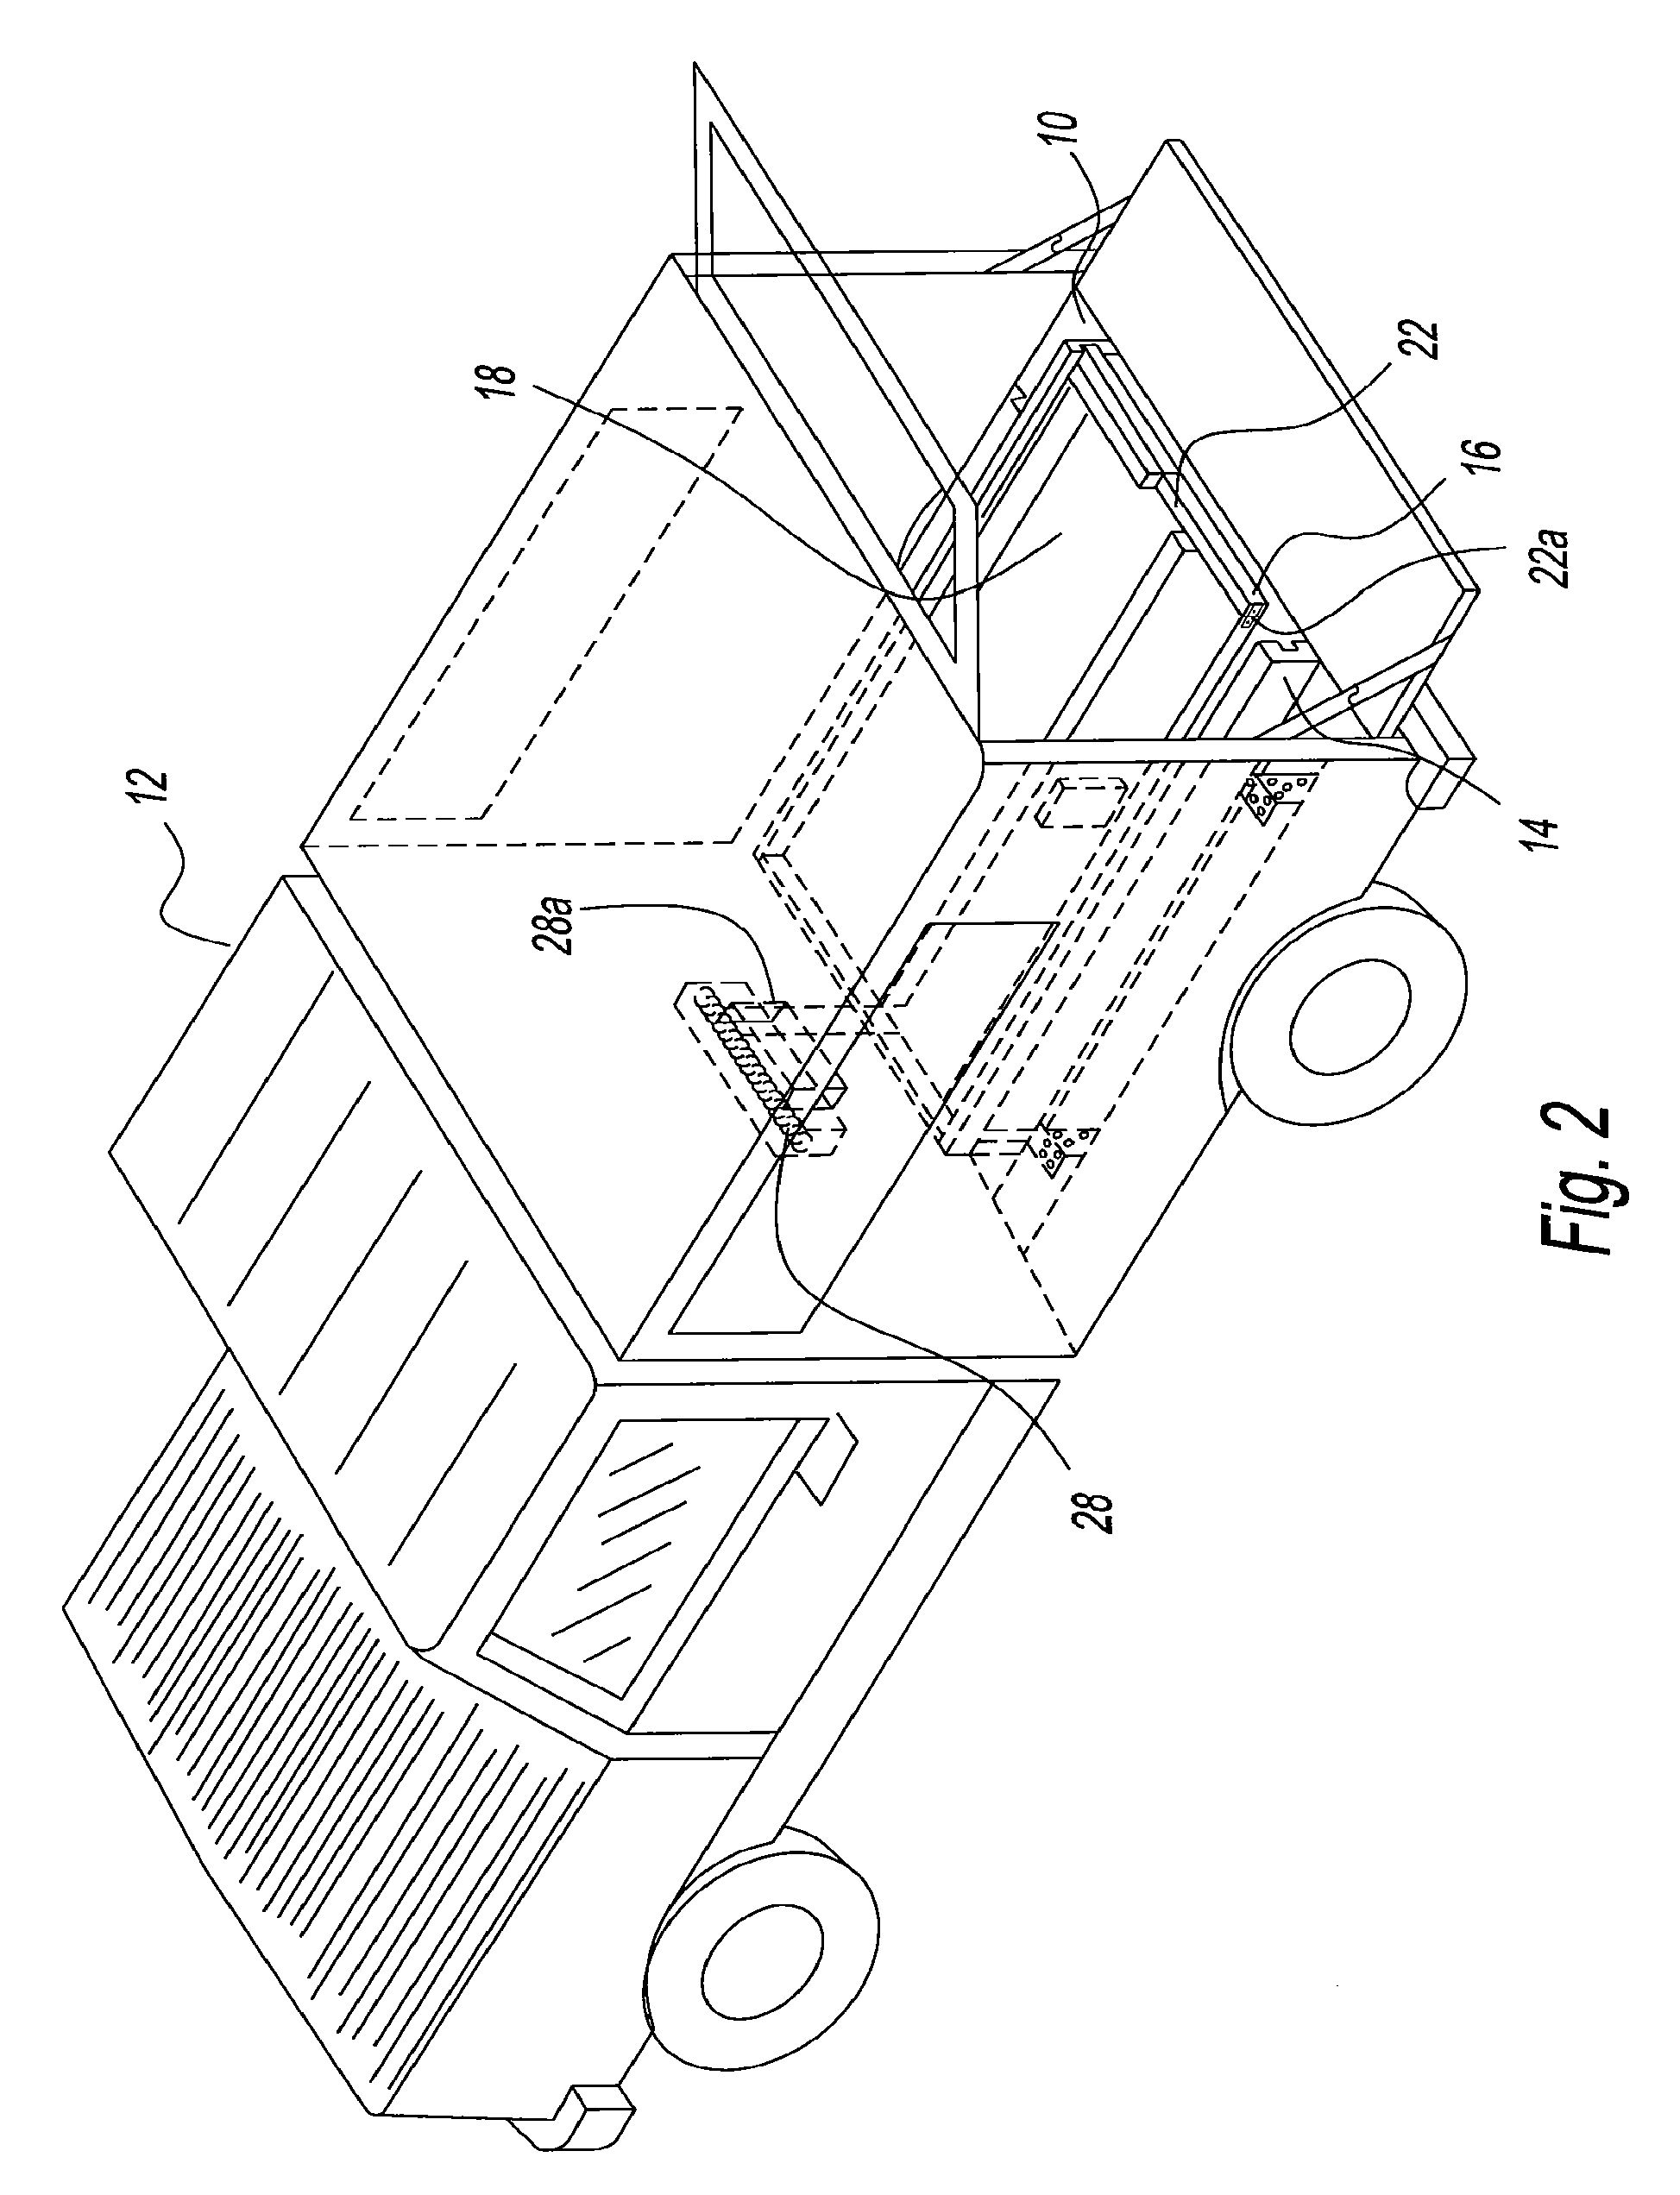 Flatbed extender system for a vehicle